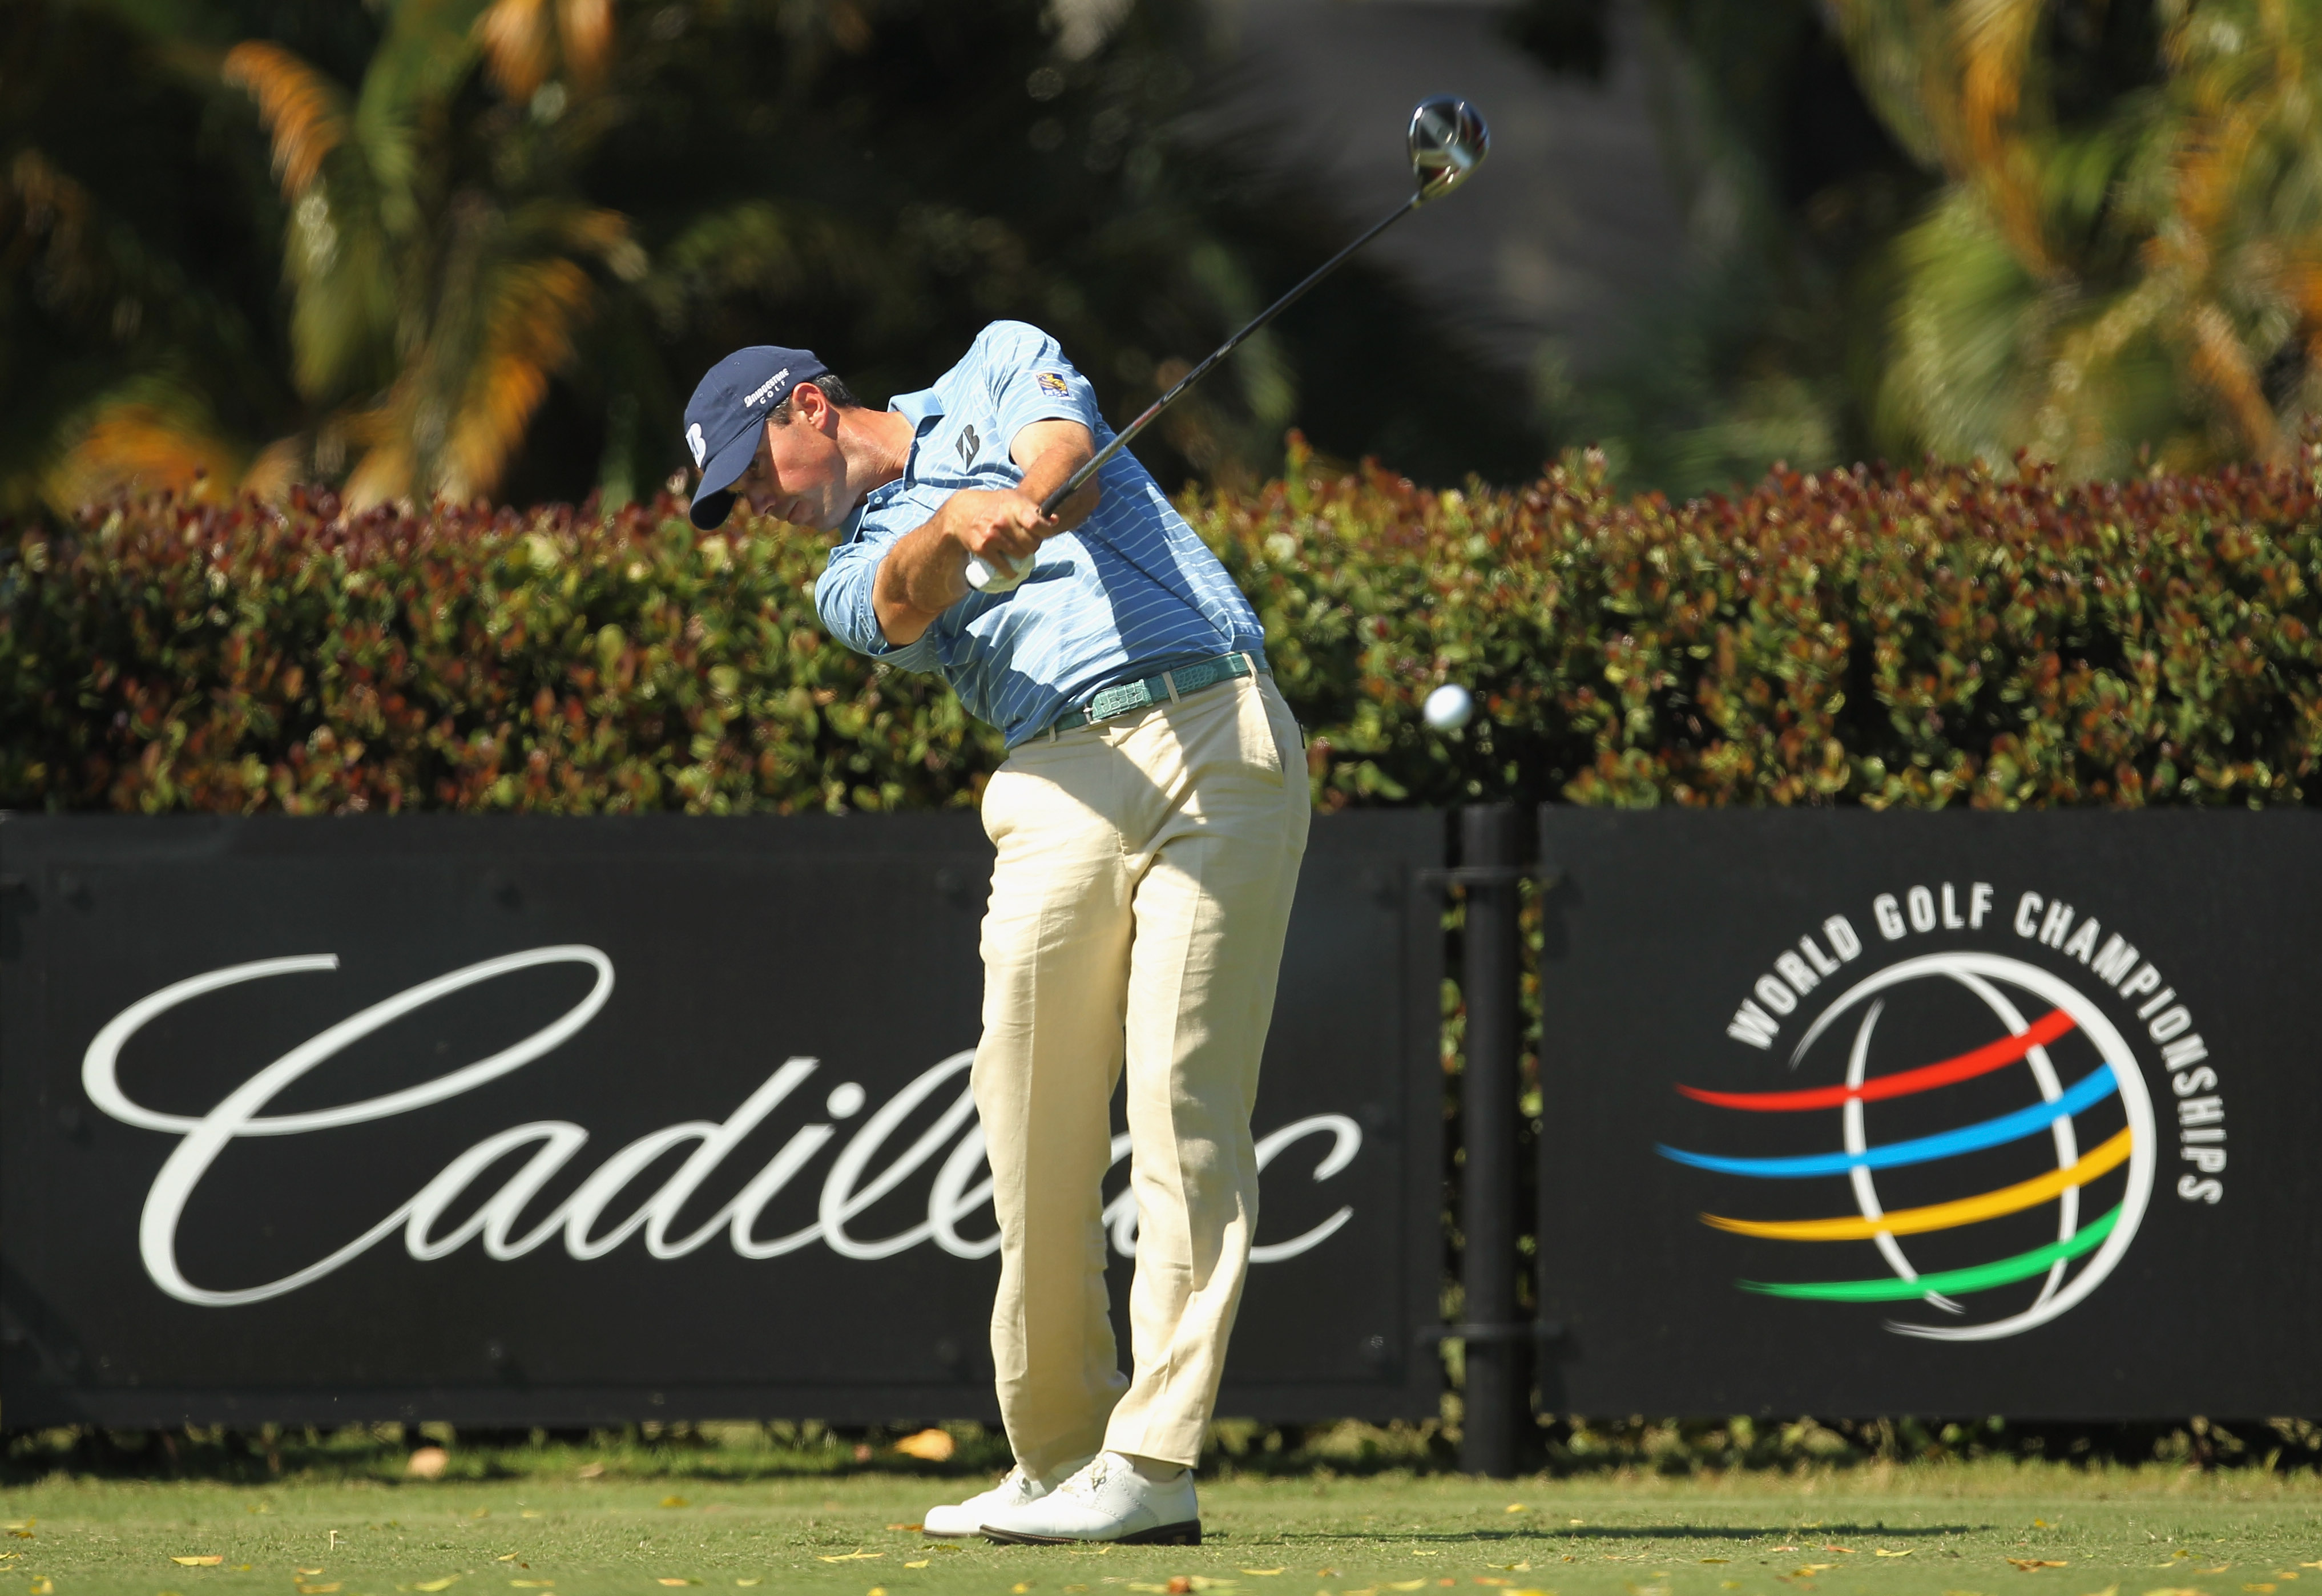 DORAL, FL - MARCH 13:  Matt Kuchar hits his tee shot on the sixth hole during the final round of the 2011 WGC- Cadillac Championship at the TPC Blue Monster at the Doral Golf Resort and Spa on March 13, 2011 in Doral, Florida.  (Photo by Mike Ehrmann/Gett